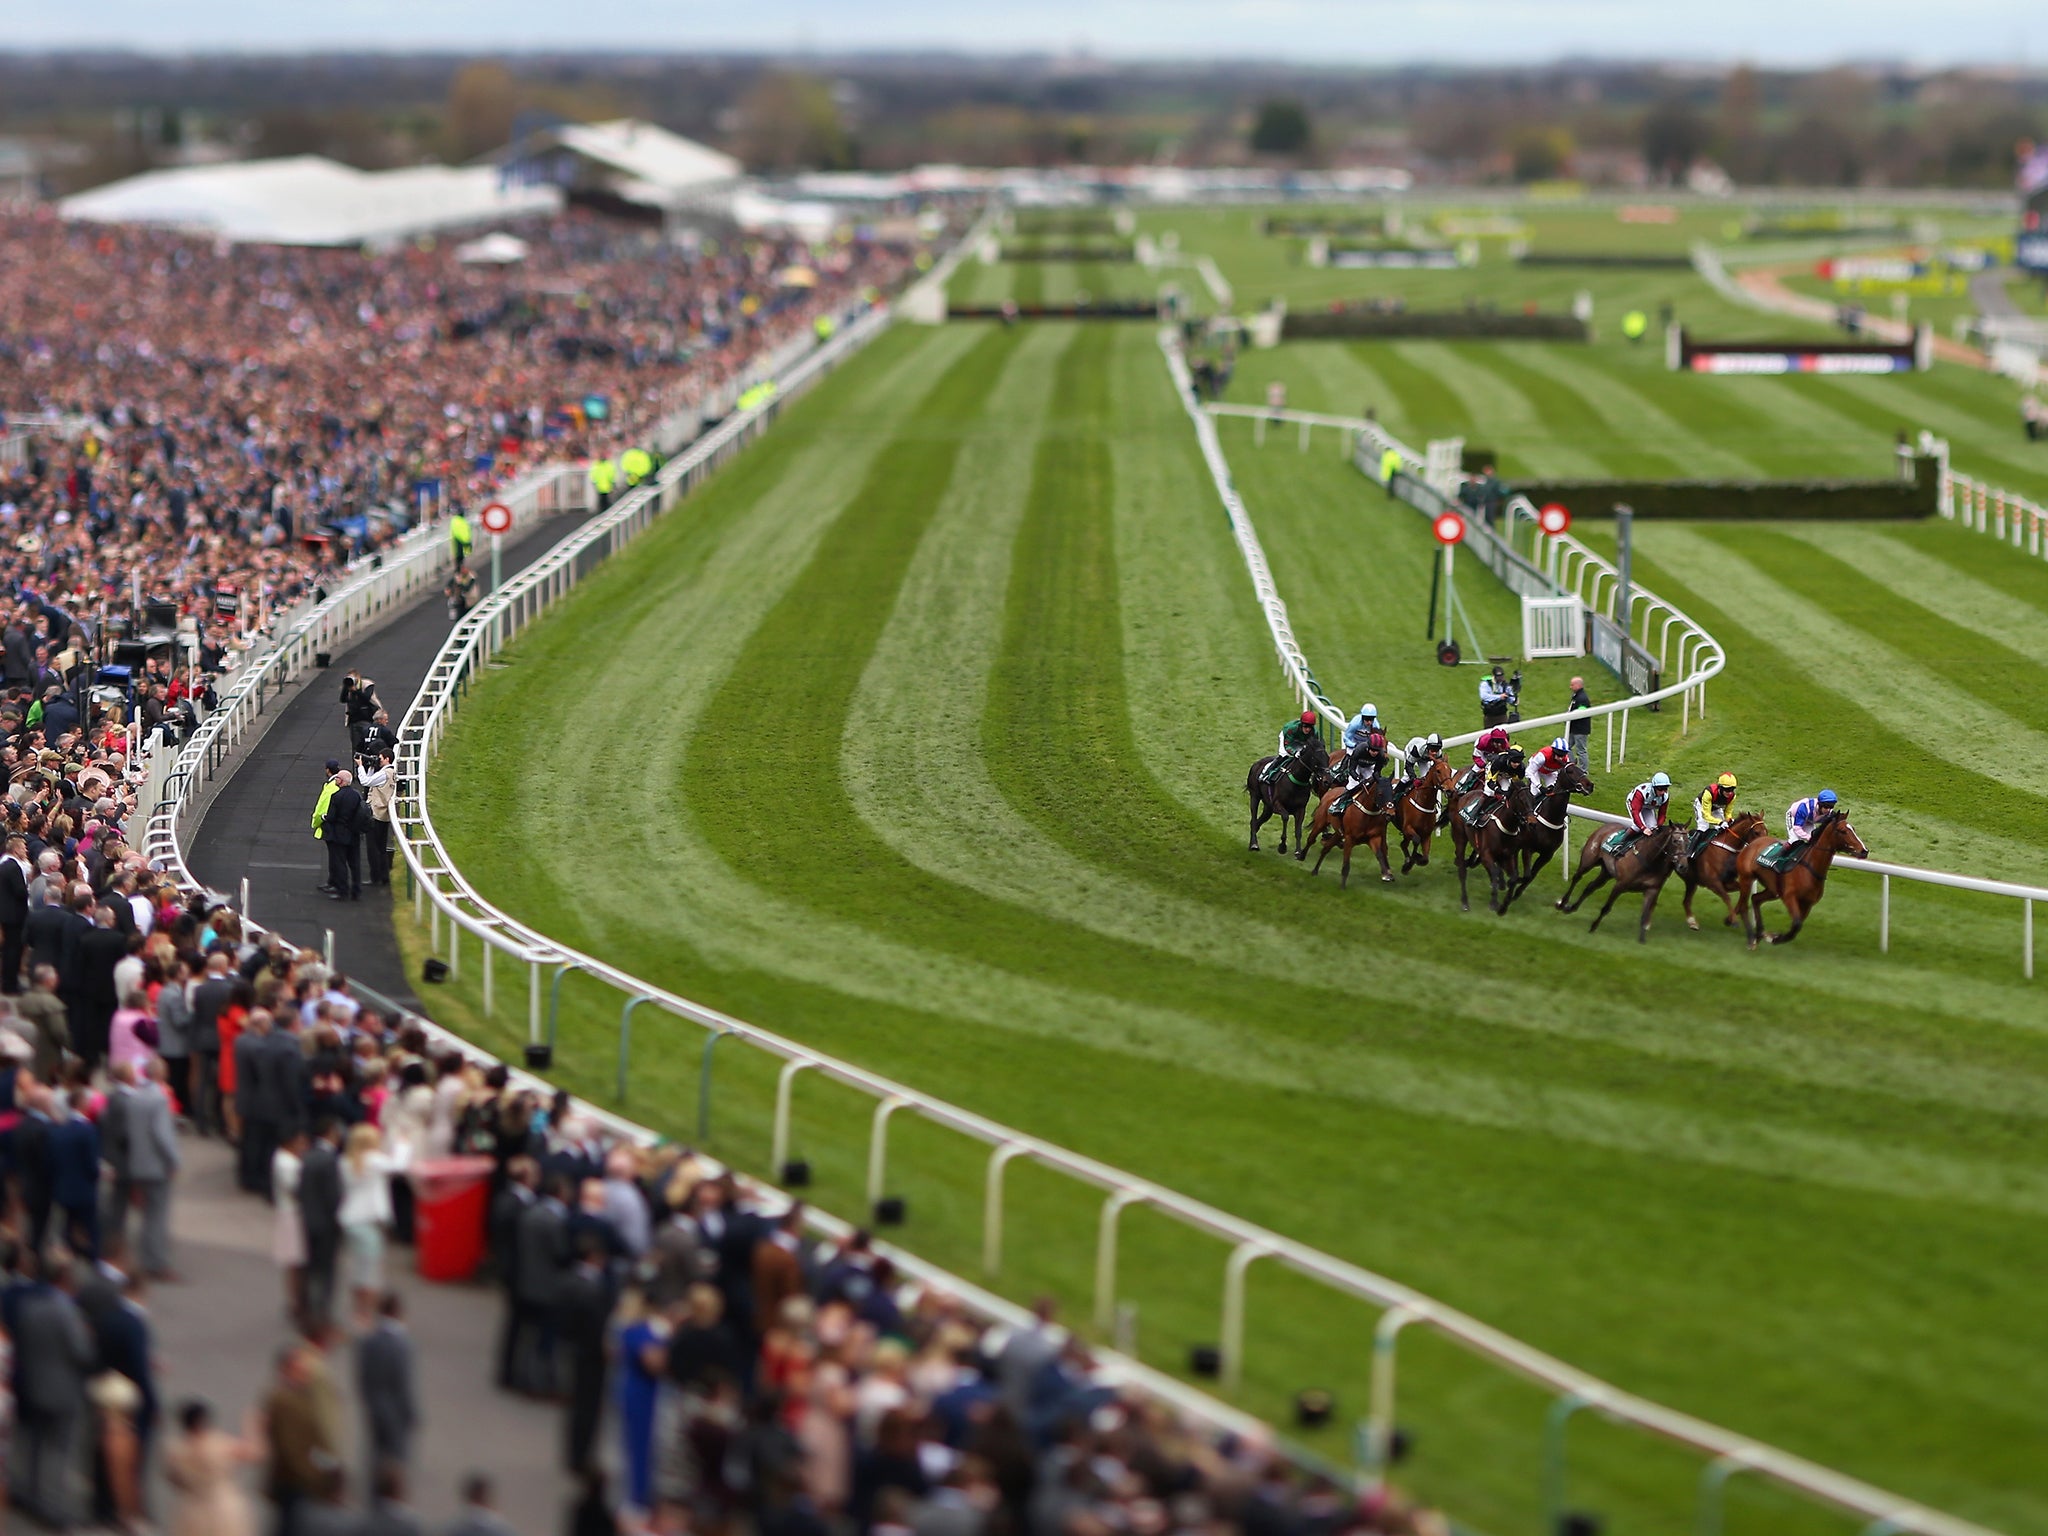 A view of the Grand National